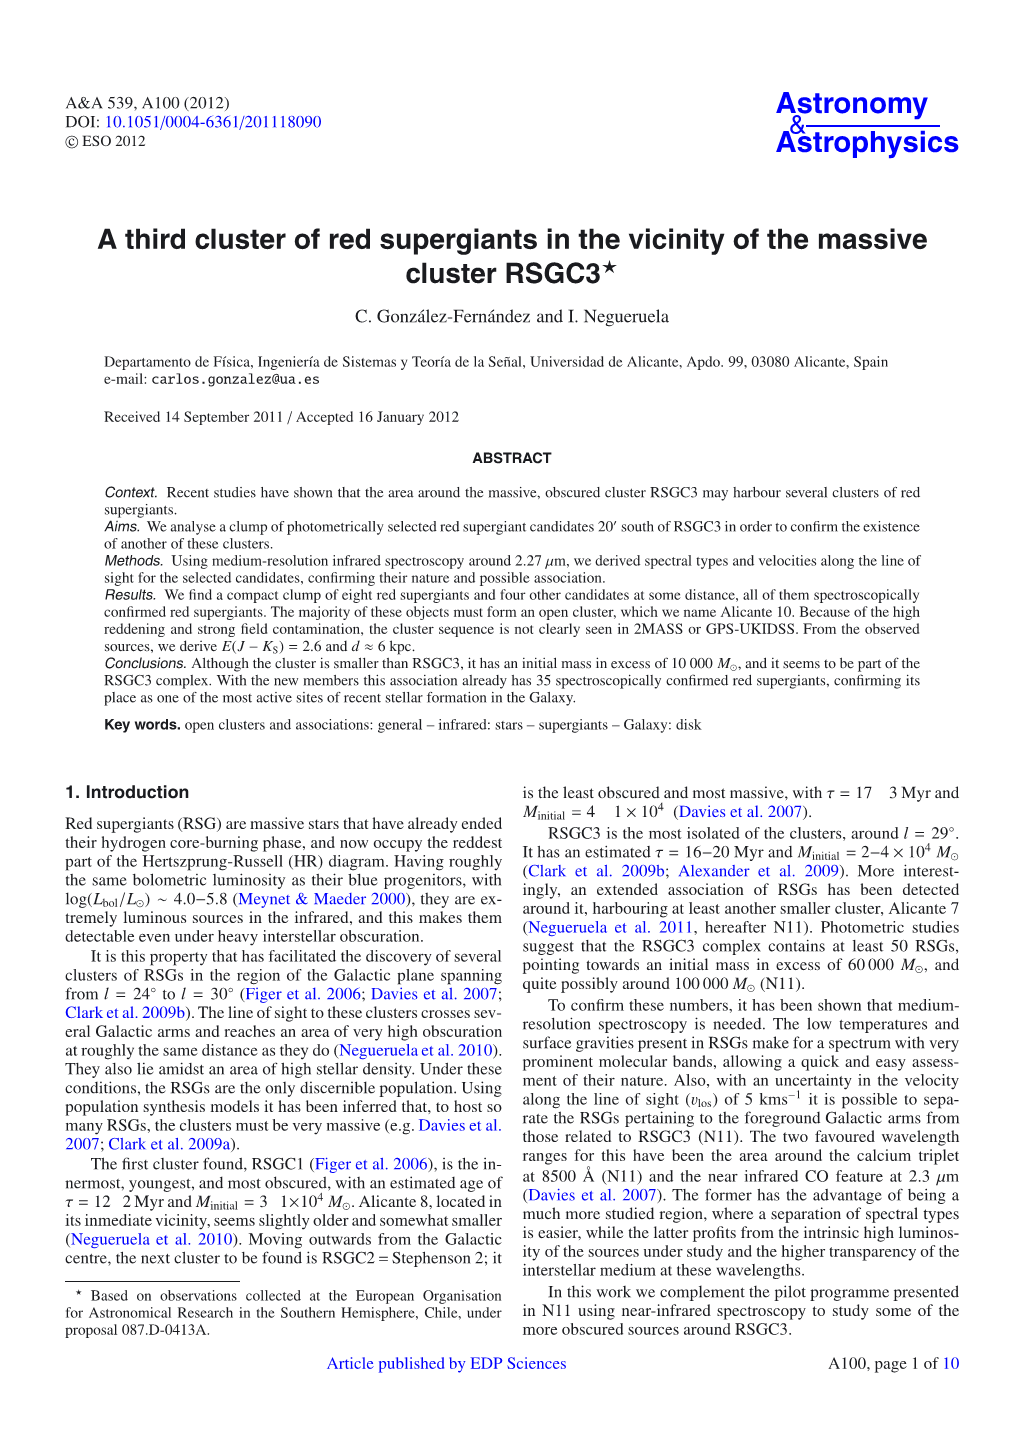 A Third Cluster of Red Supergiants in the Vicinity of the Massive Cluster RSGC3